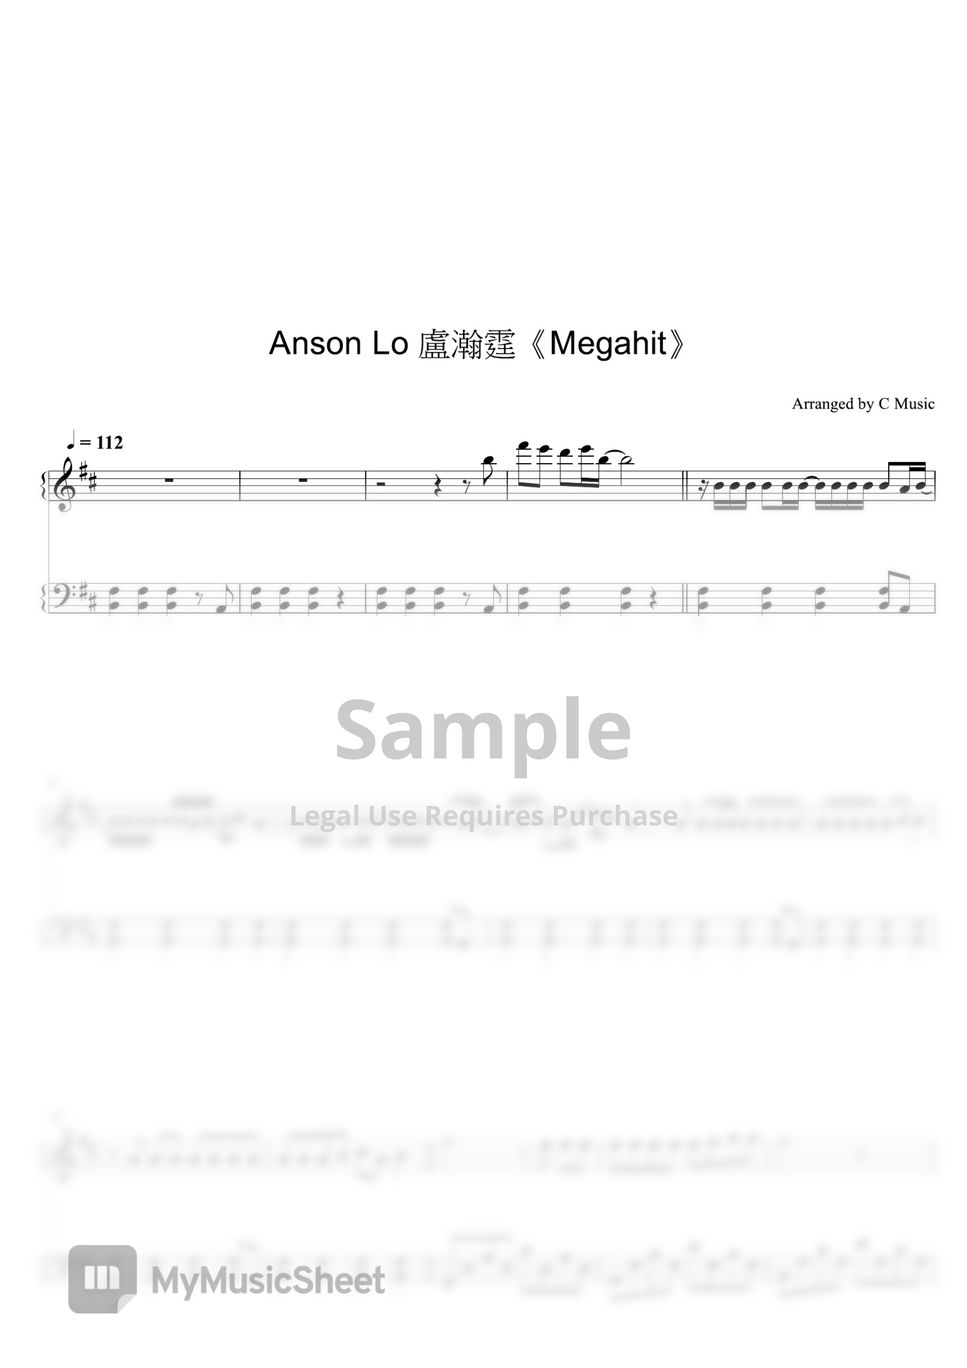 Anson Lo 盧瀚霆 - Megahit by C Music